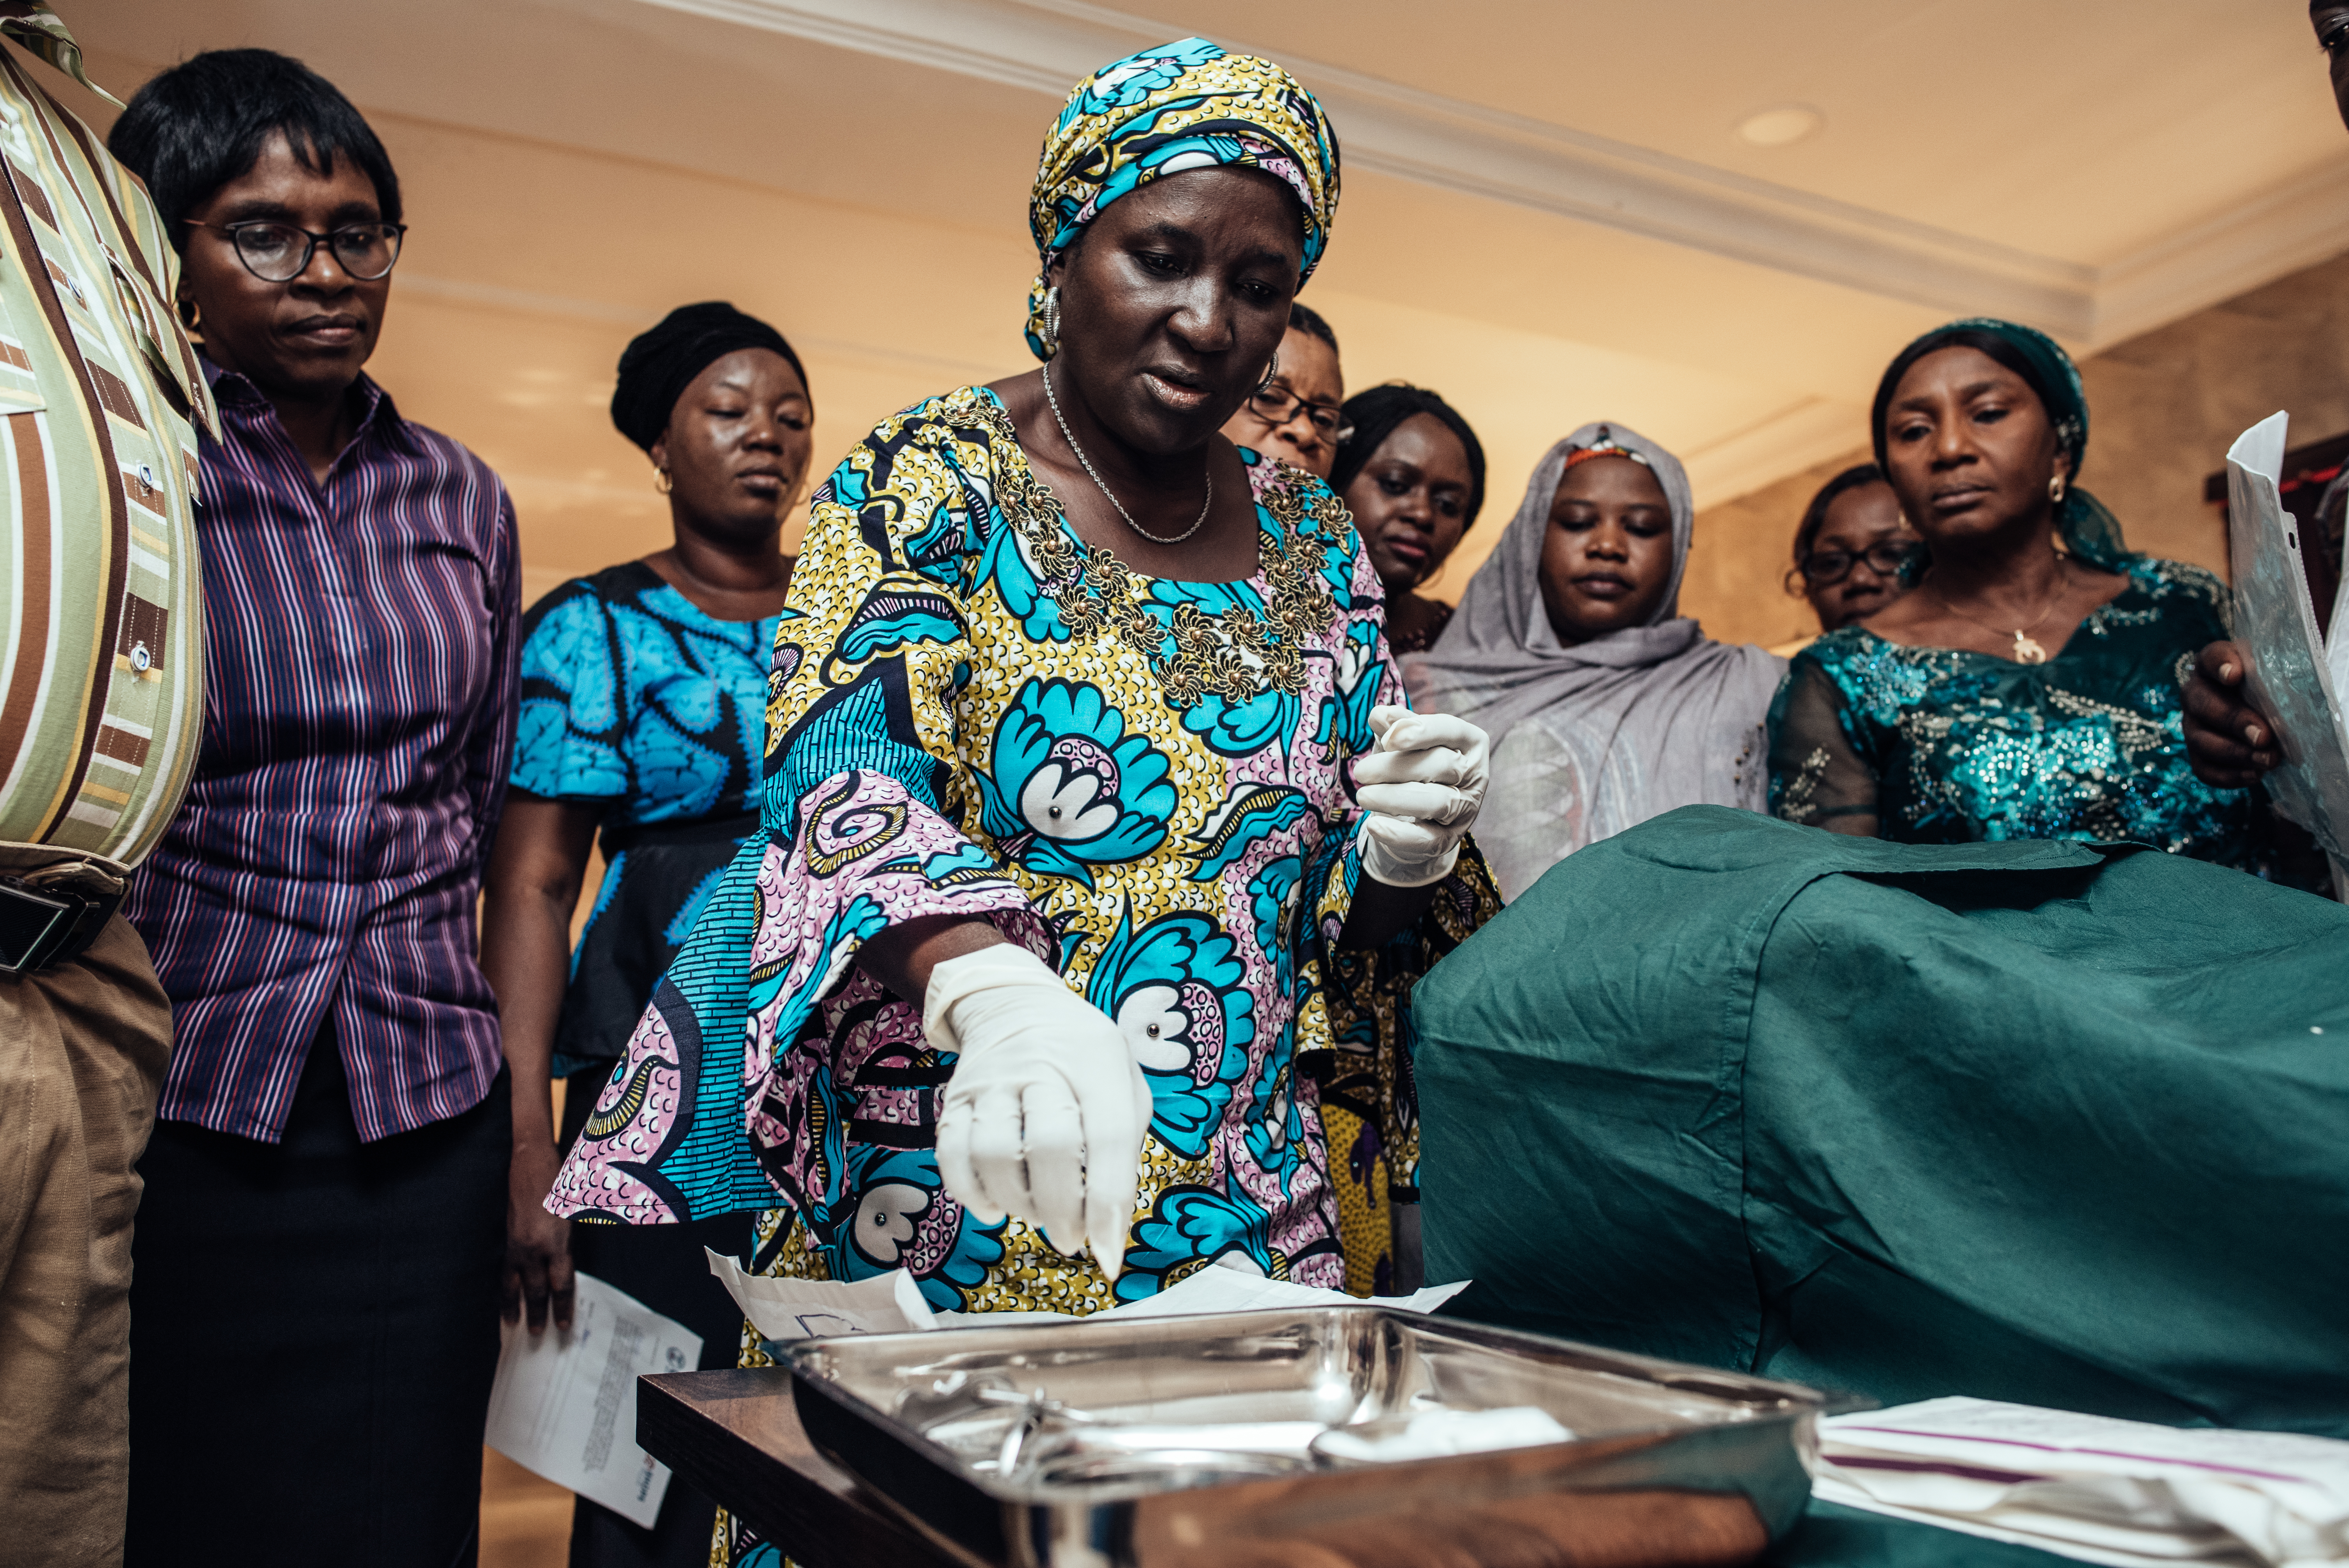 TA health provider in Nigeria uses a model to practice inserting an IUD as her fellow trainees watch.